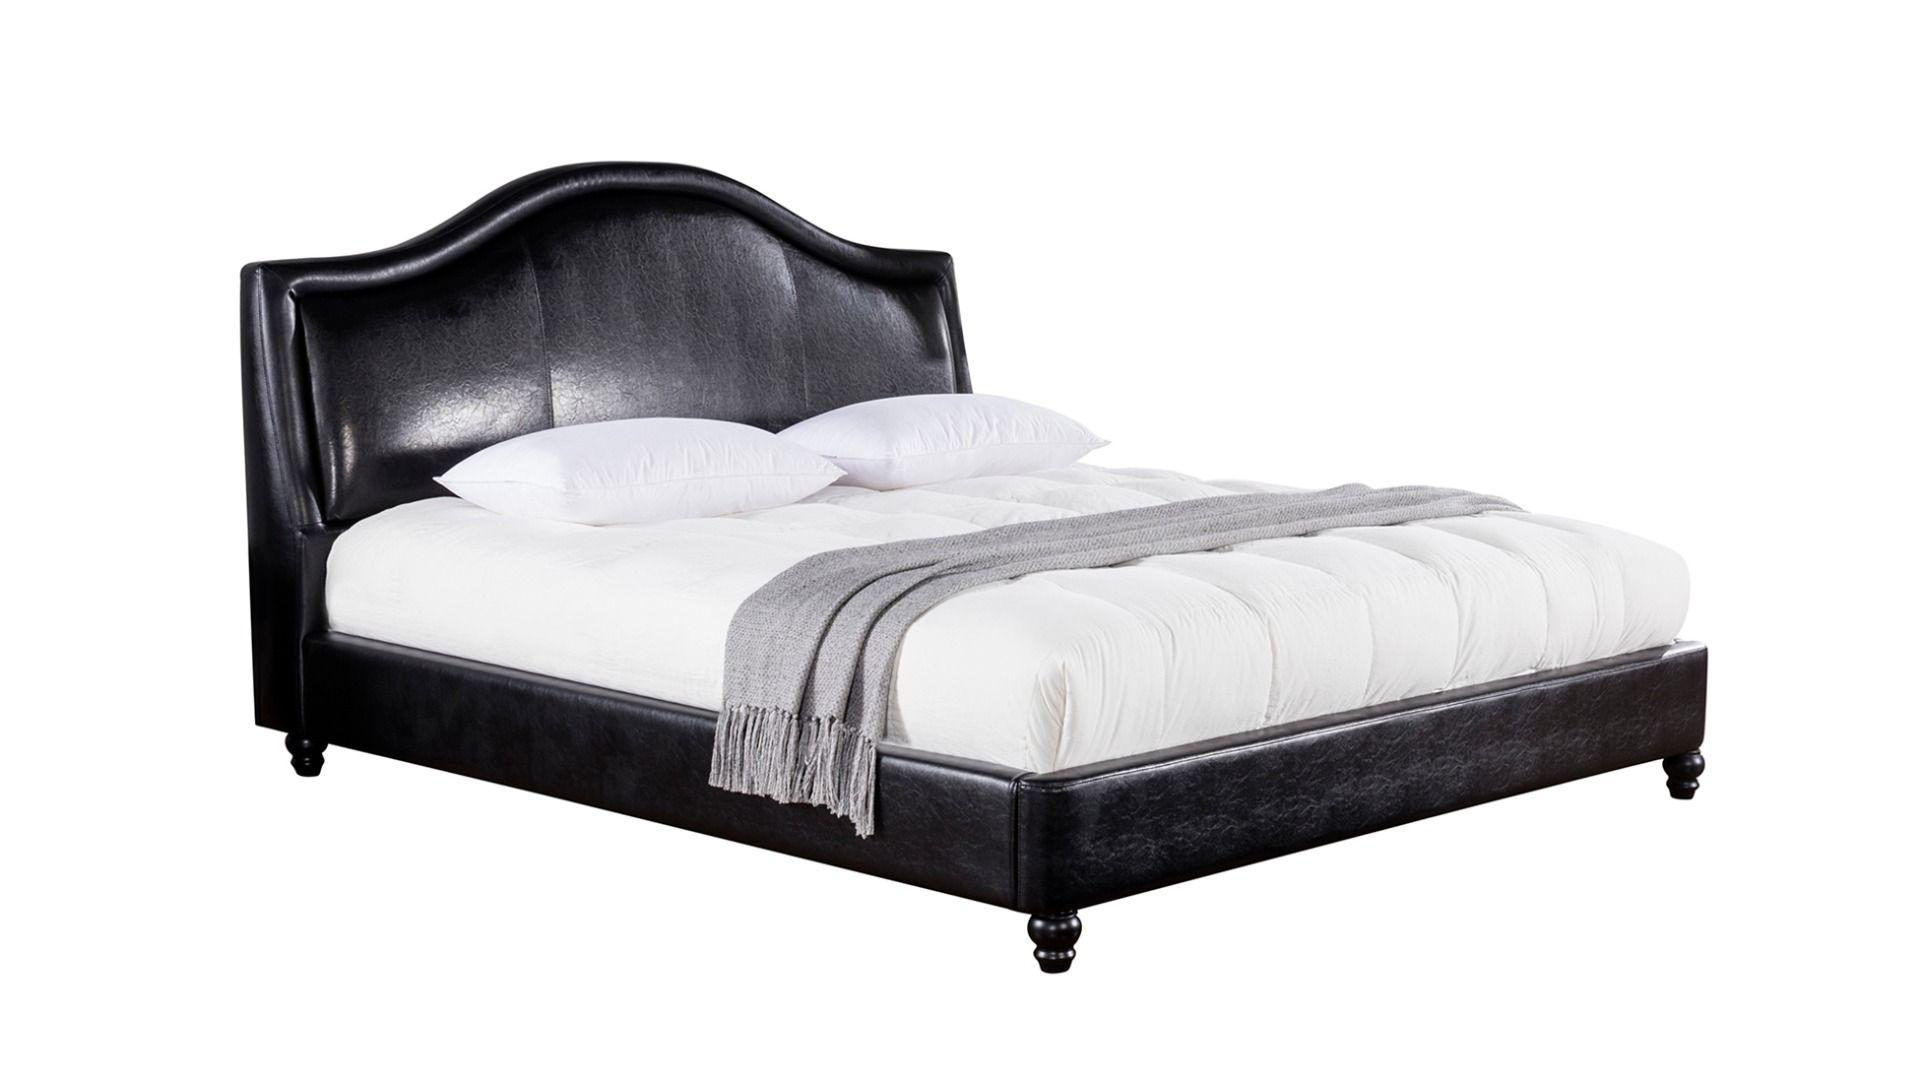 Contemporary Platform Bed B-D059 AE B-D059-Q in Black Leather Air Fabric